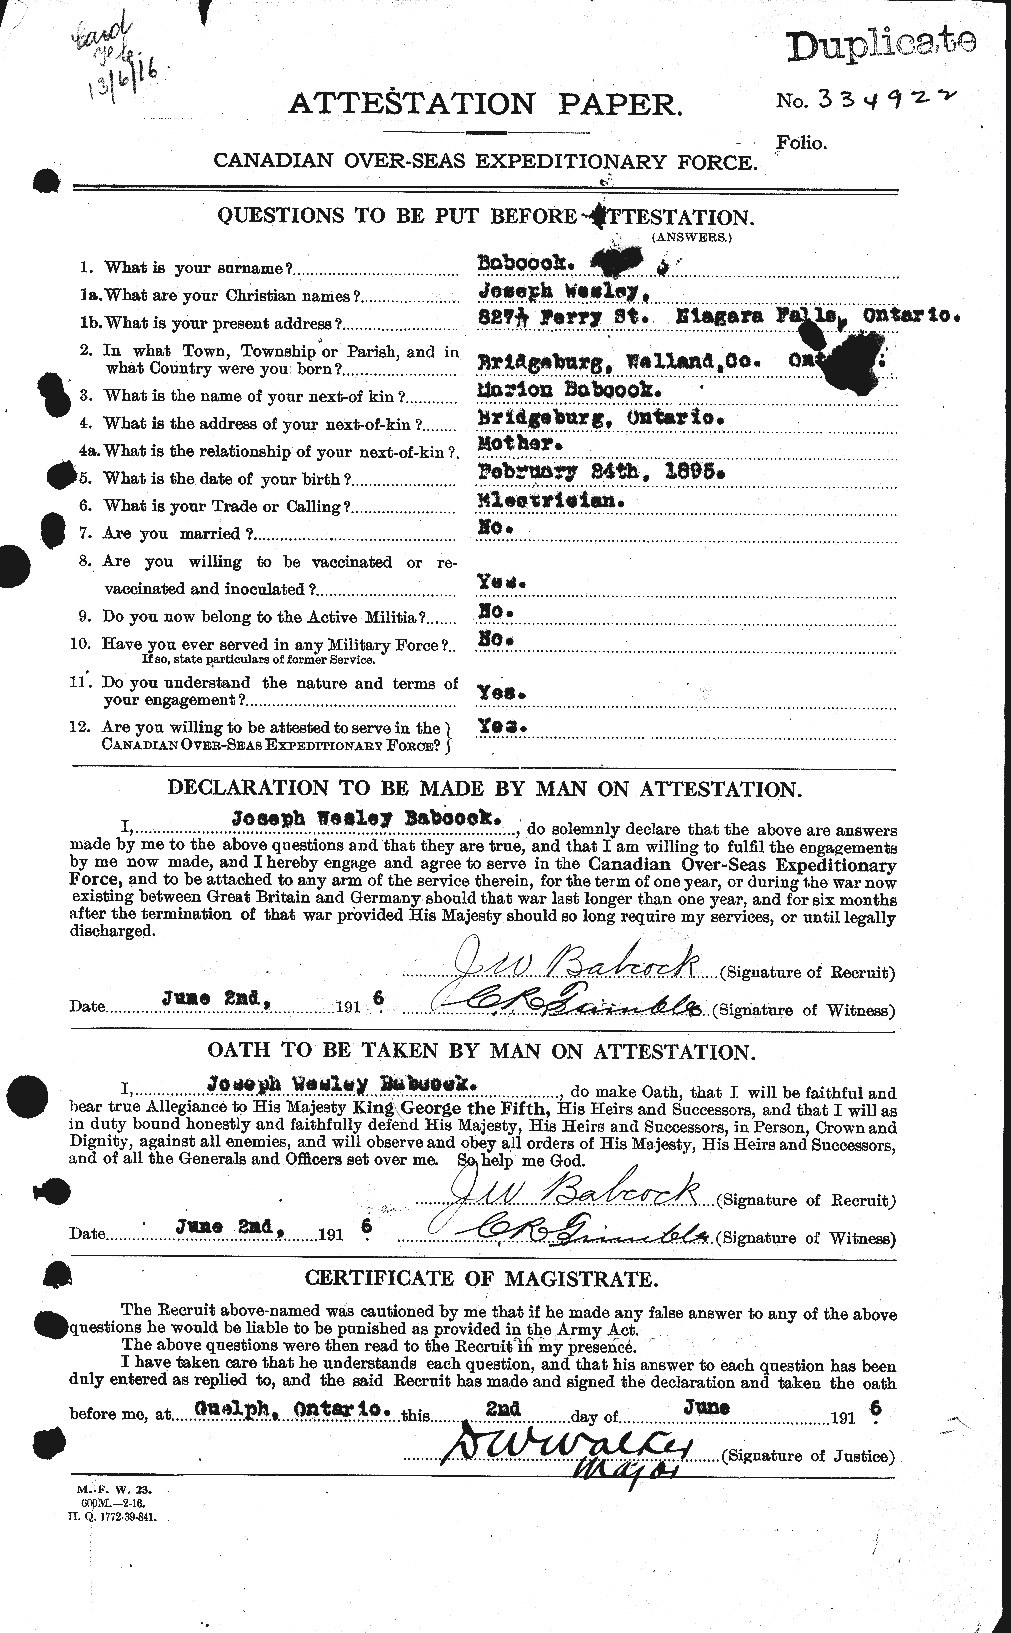 Personnel Records of the First World War - CEF 218224a